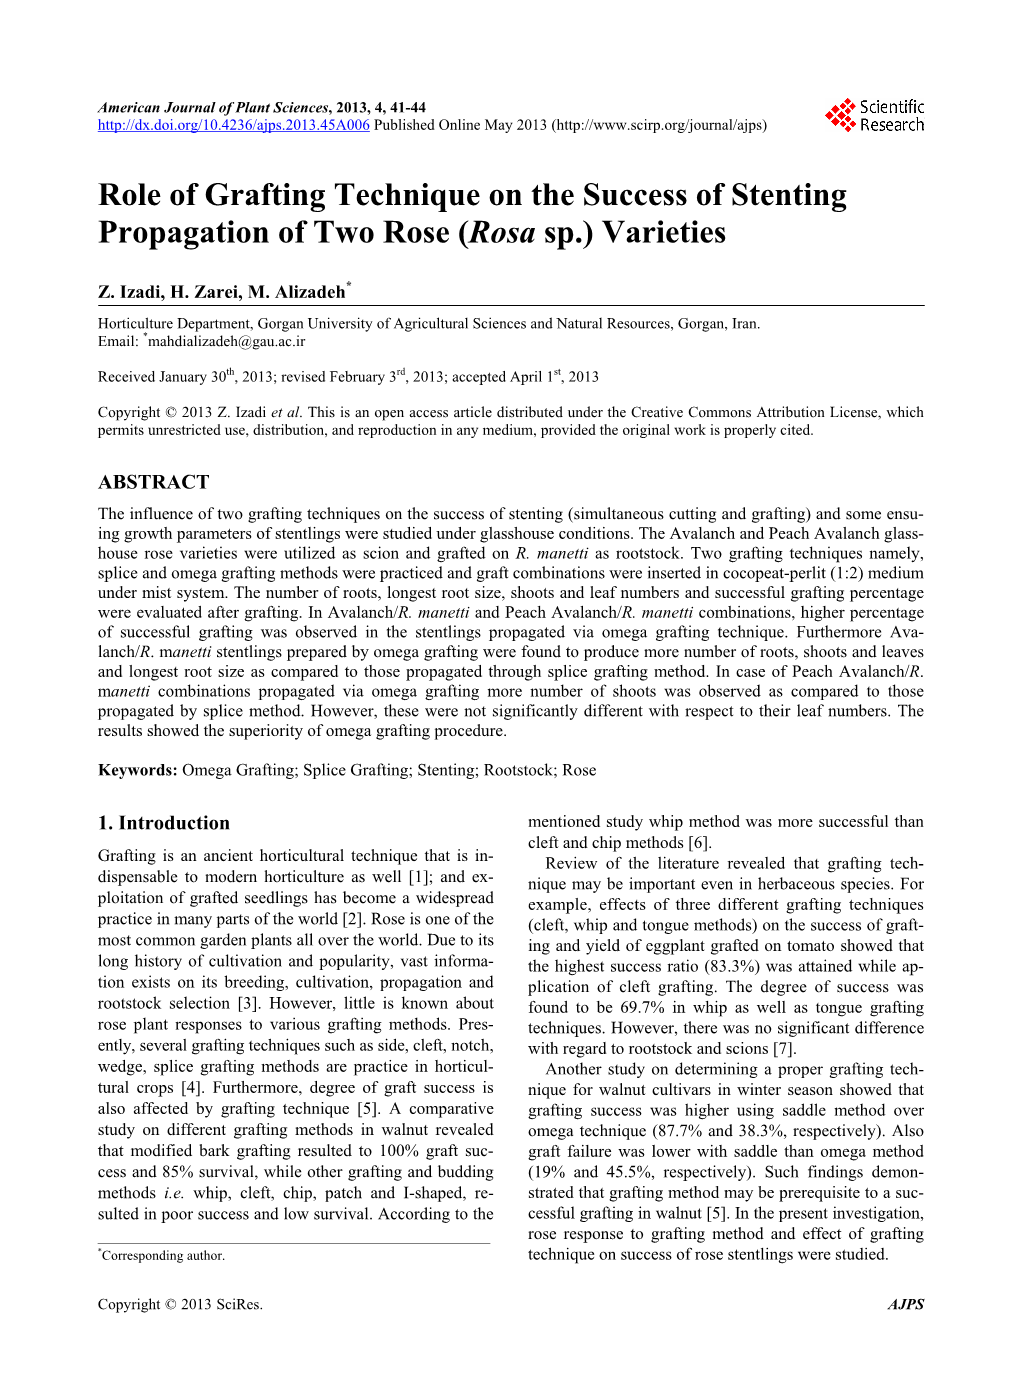 Role of Grafting Technique on the Success of Stenting Propagation of Two Rose (Rosa Sp.) Varieties